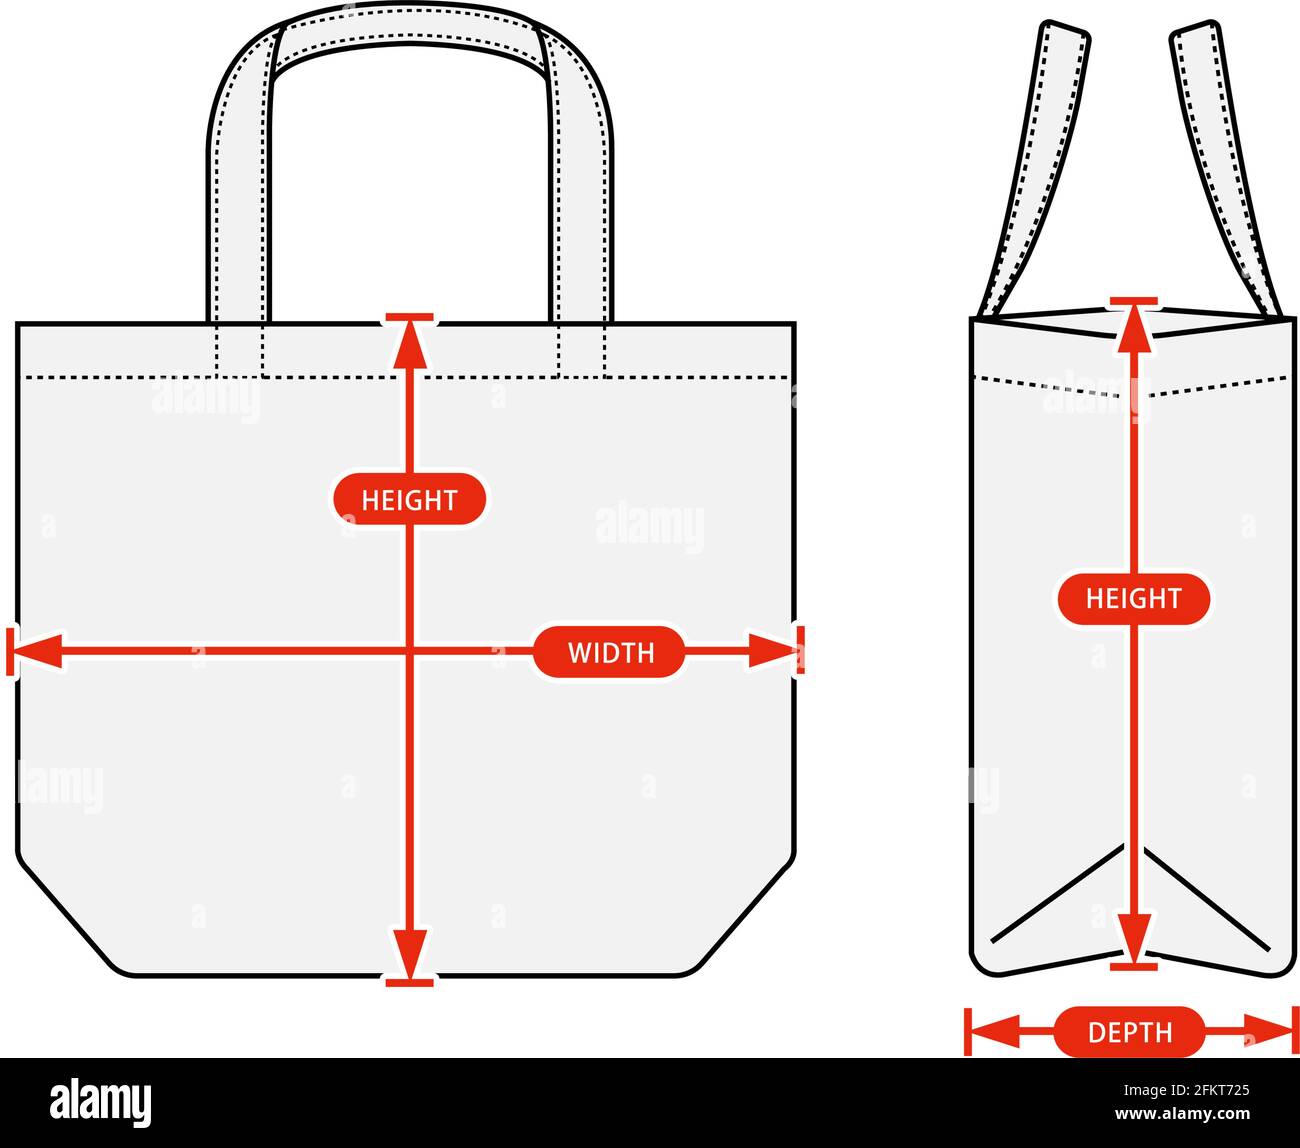 tote bag size guide